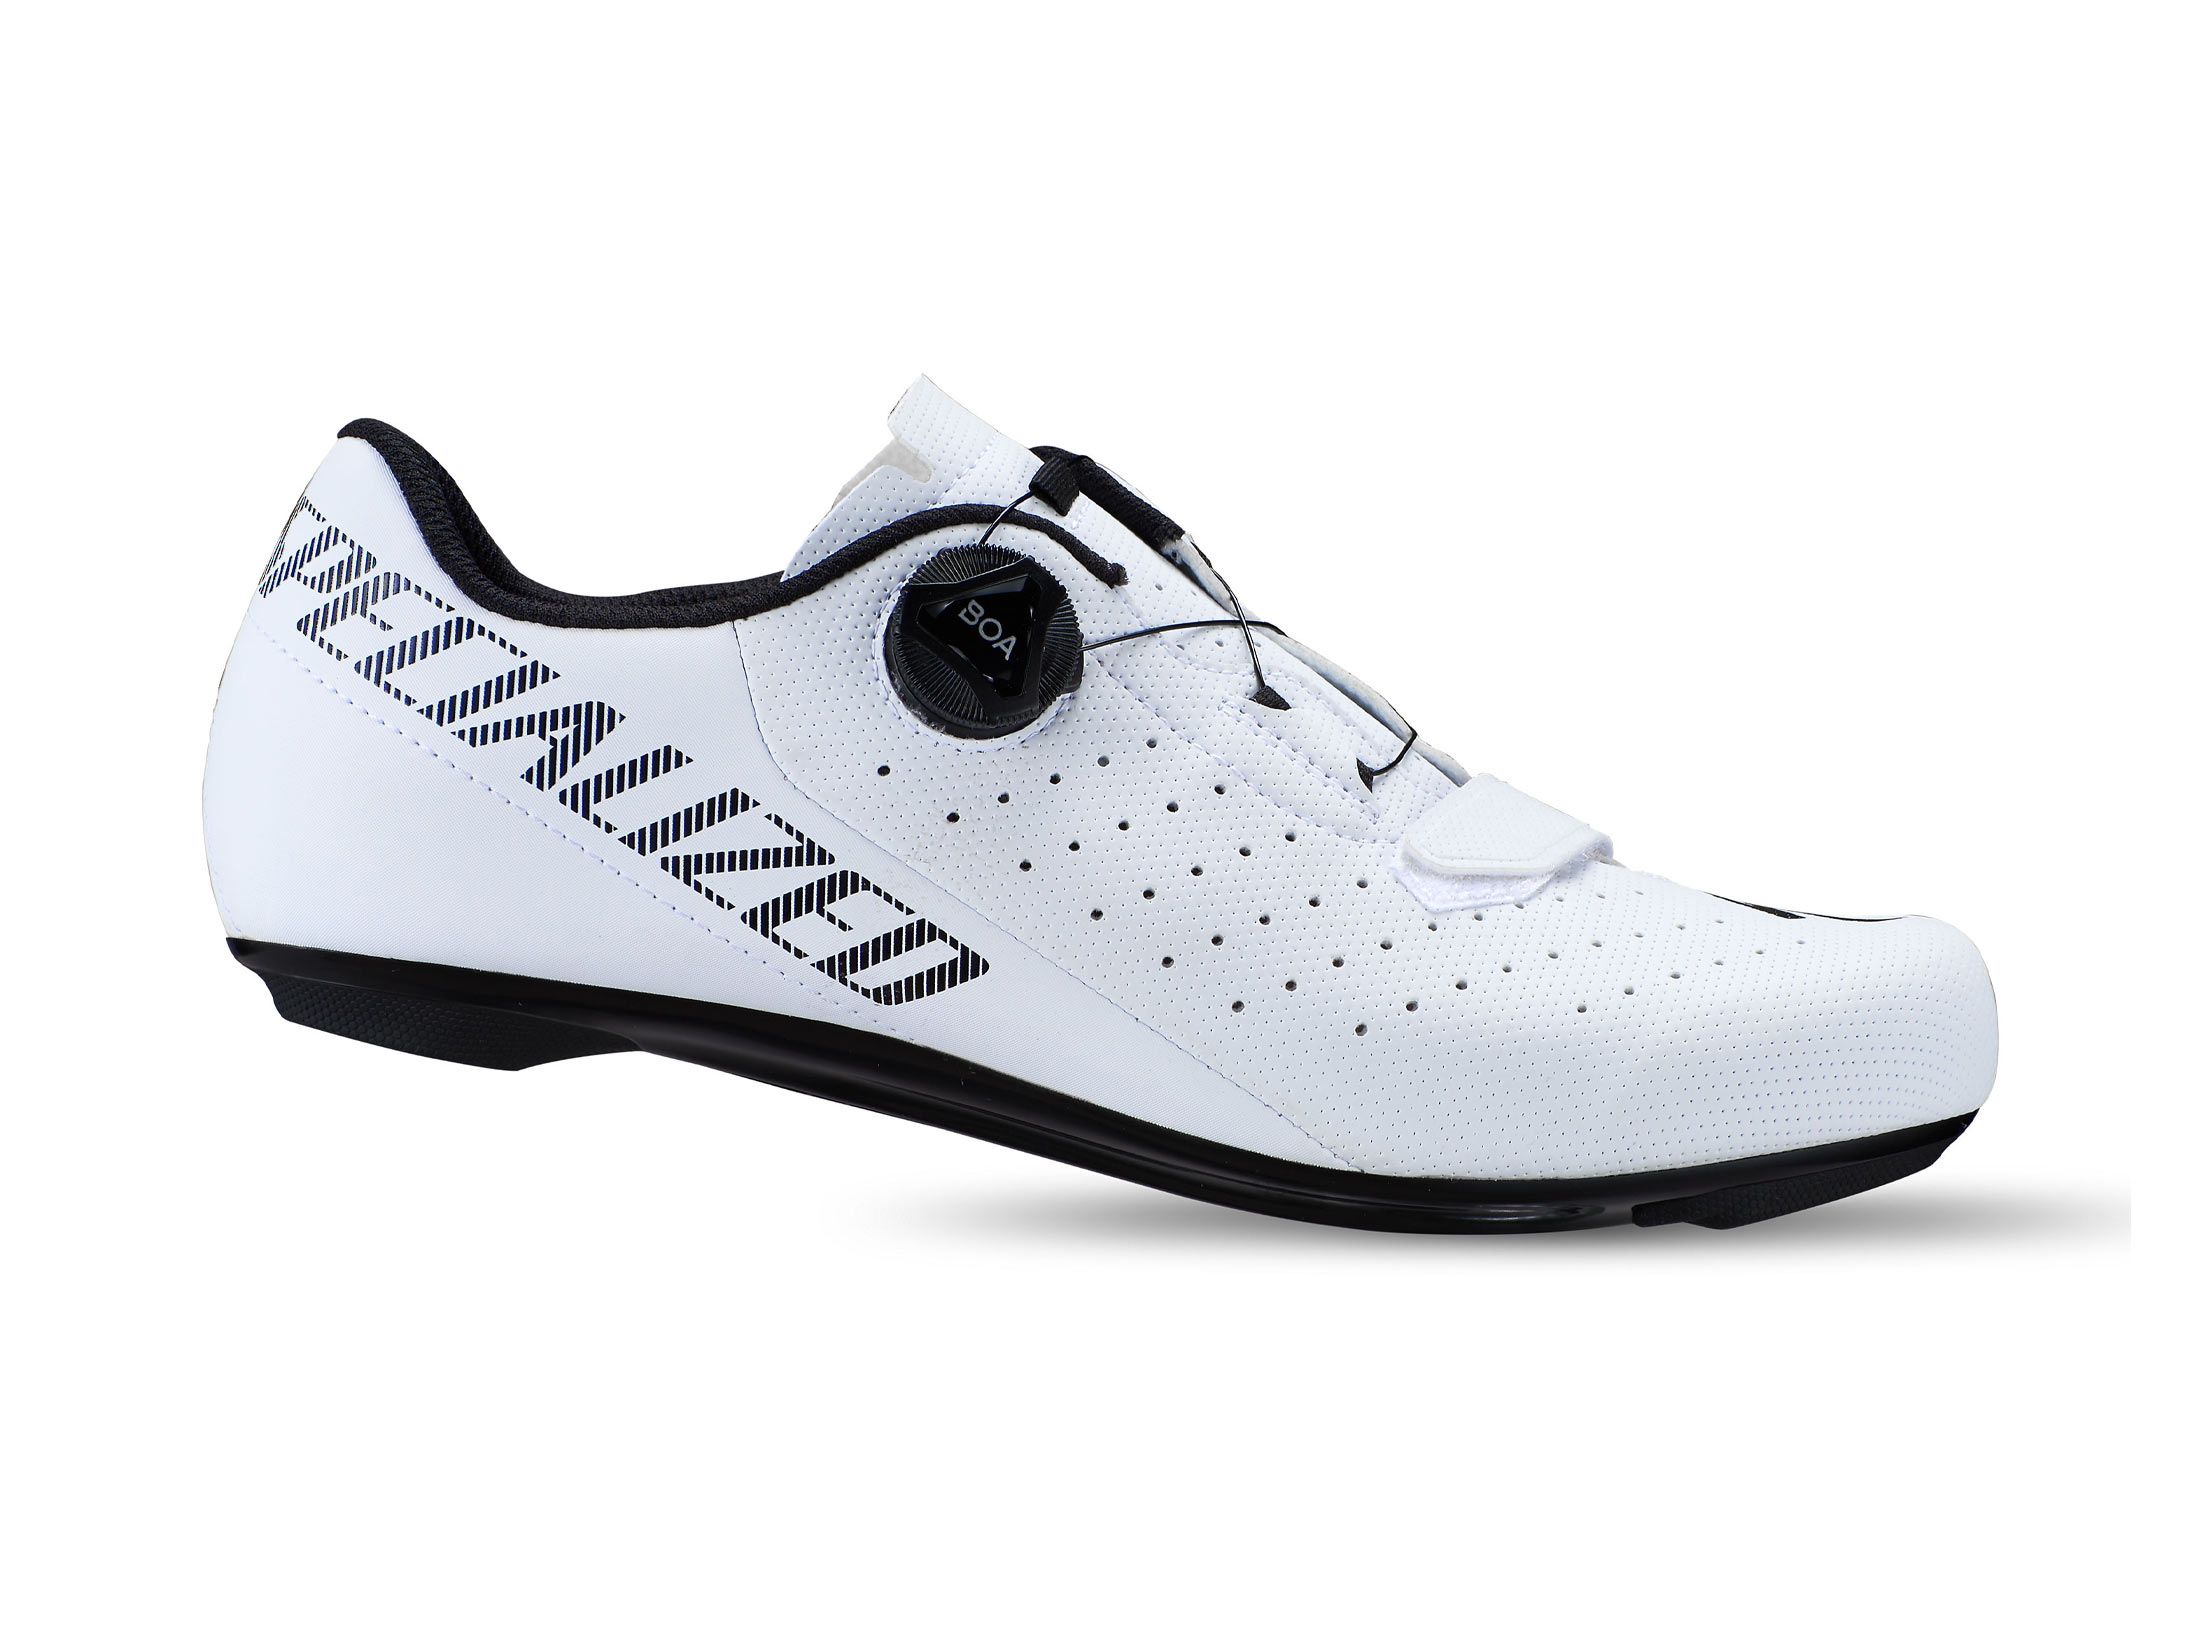 Specialized Torch 1.0 Road Shoes - White